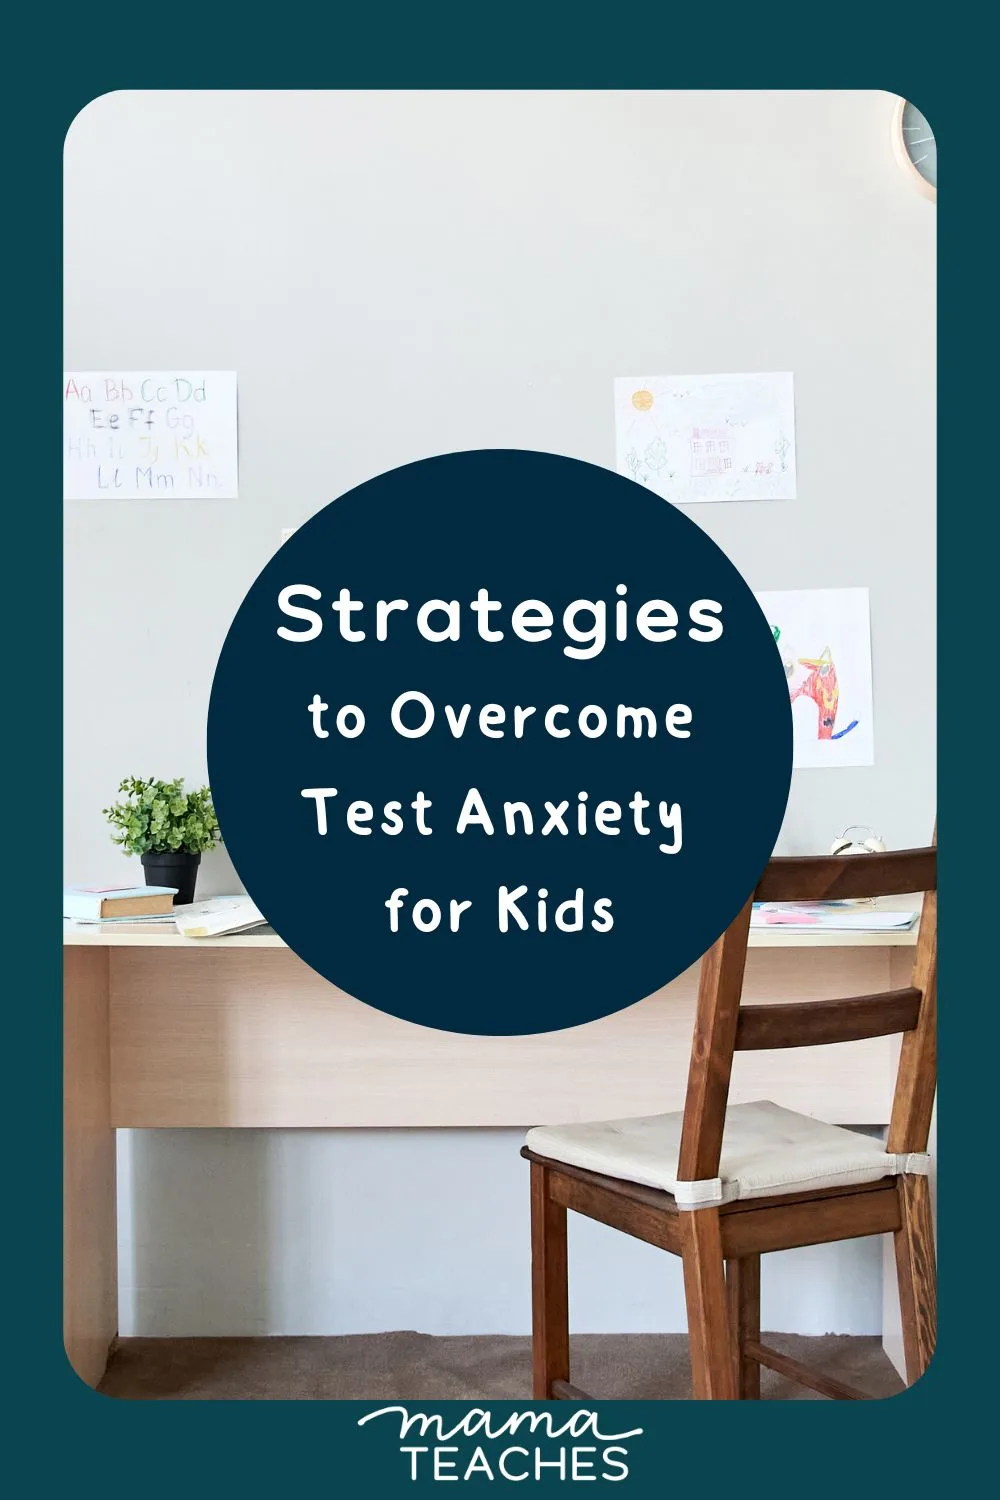 Strategies to Overcome Test Anxiety for Kids